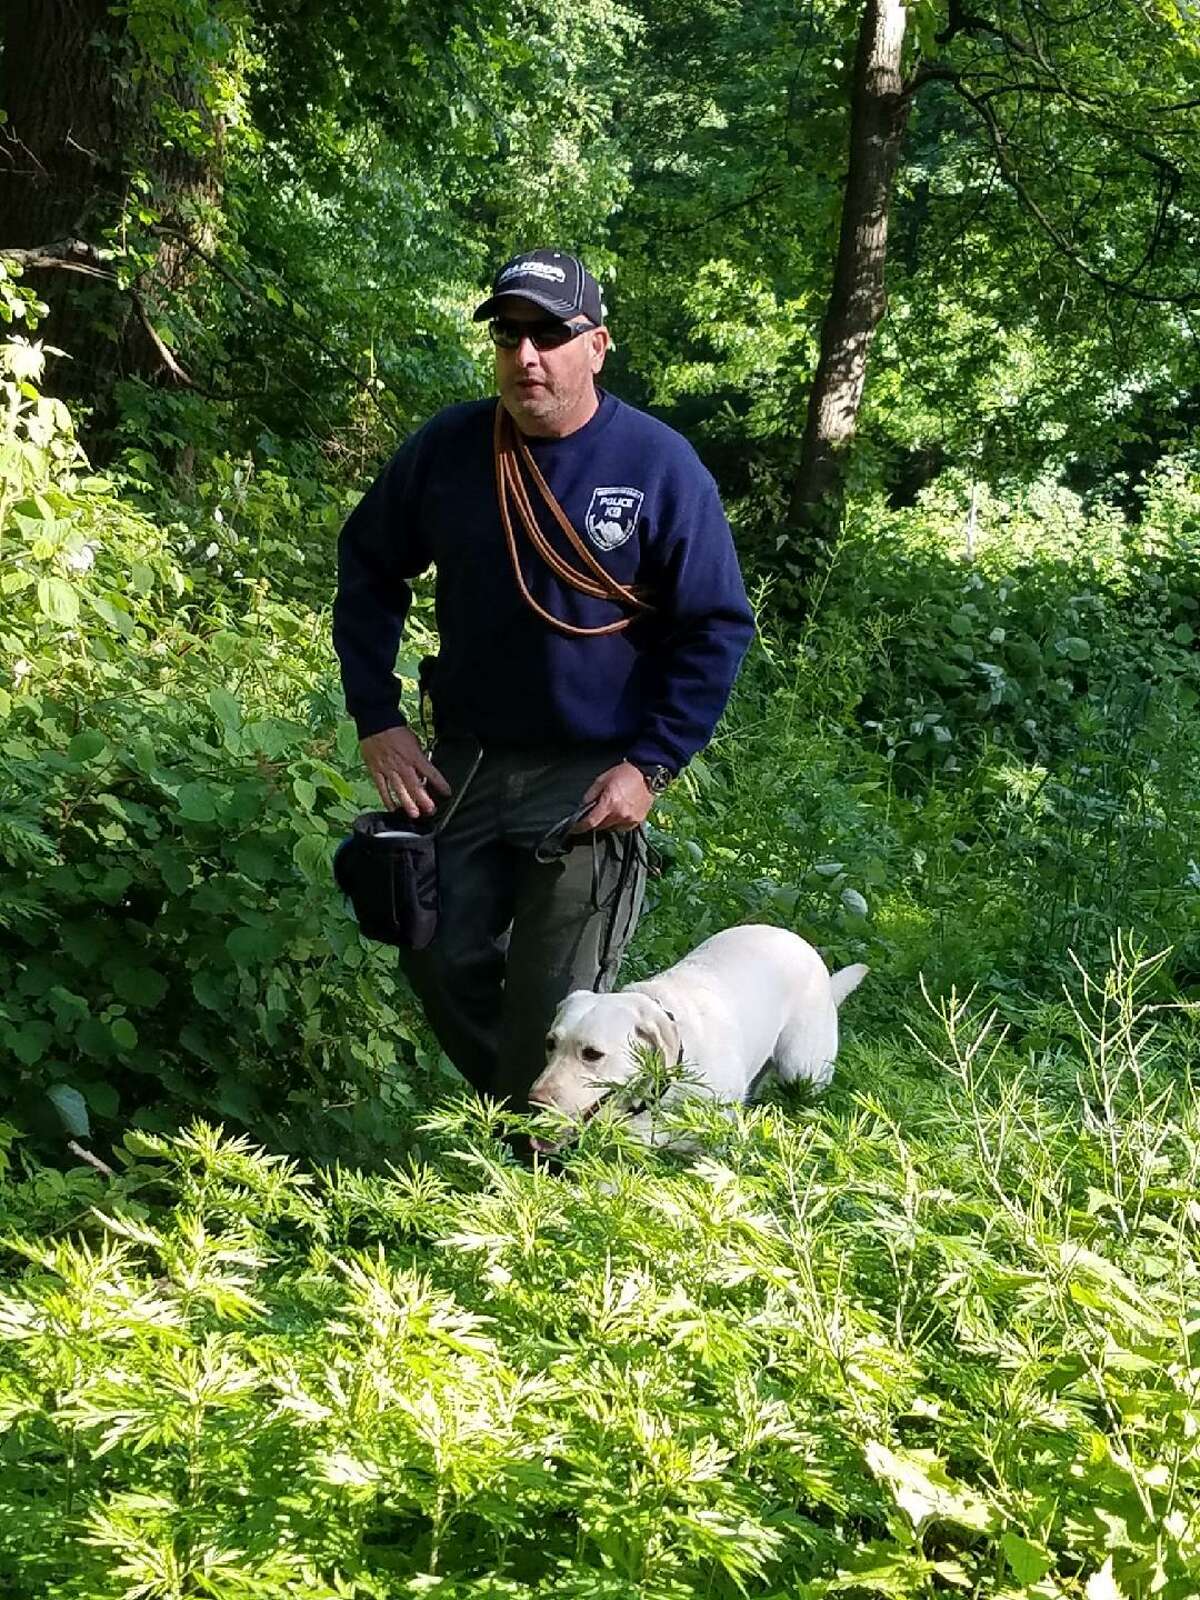 State Police with dogs trained to sniff out electronic equipment search Waveny Park in New Canaan for a cell phone as part of the investigation into the disappearance of Jennifer Dulos on Monday, June 3.